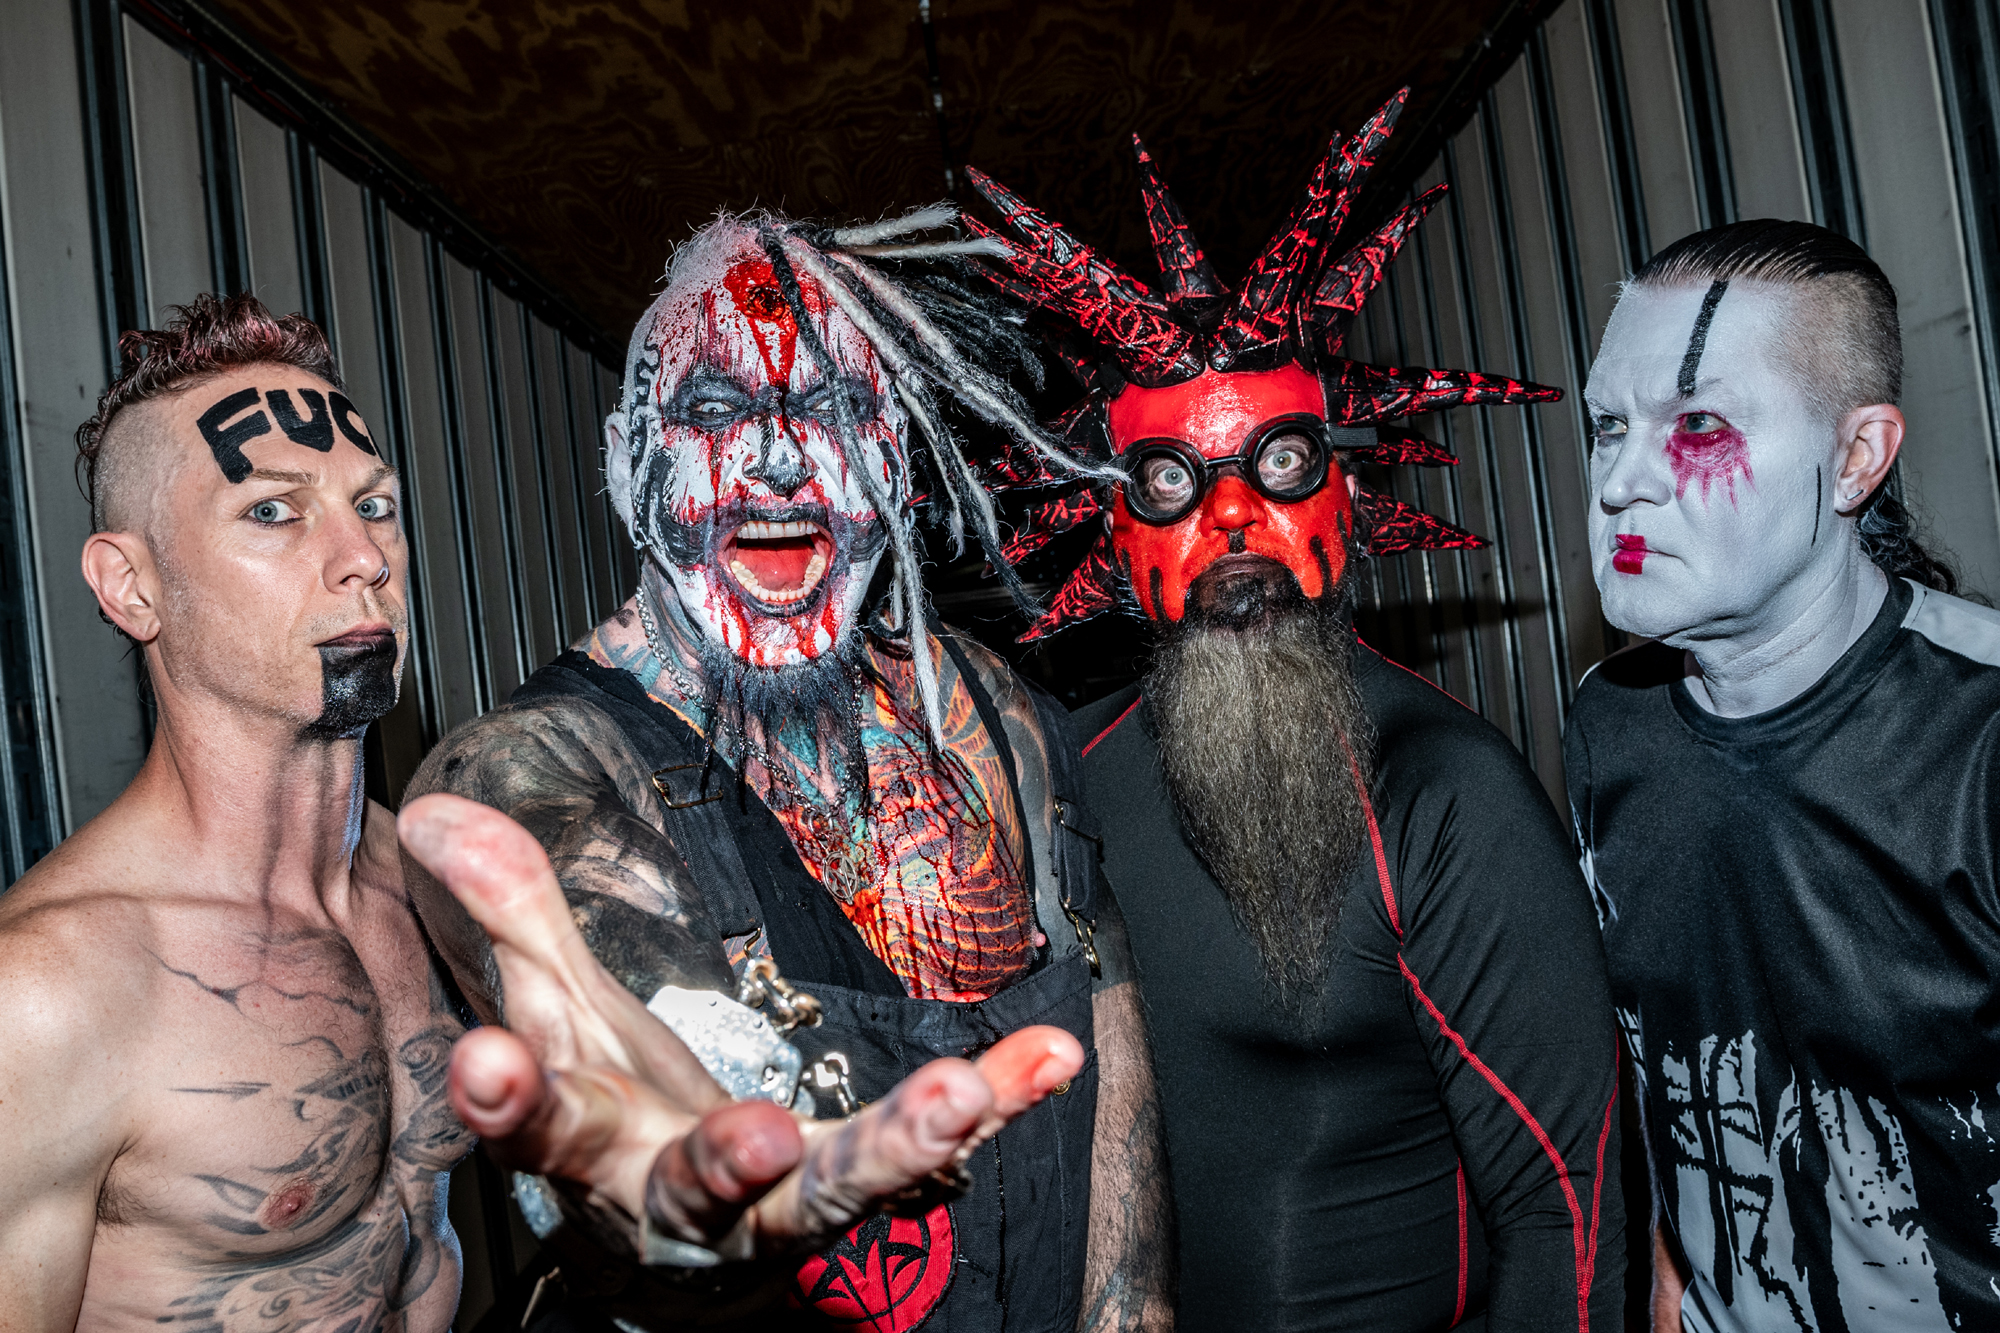 It's settled: James Hetfield had the best Halloween costume this